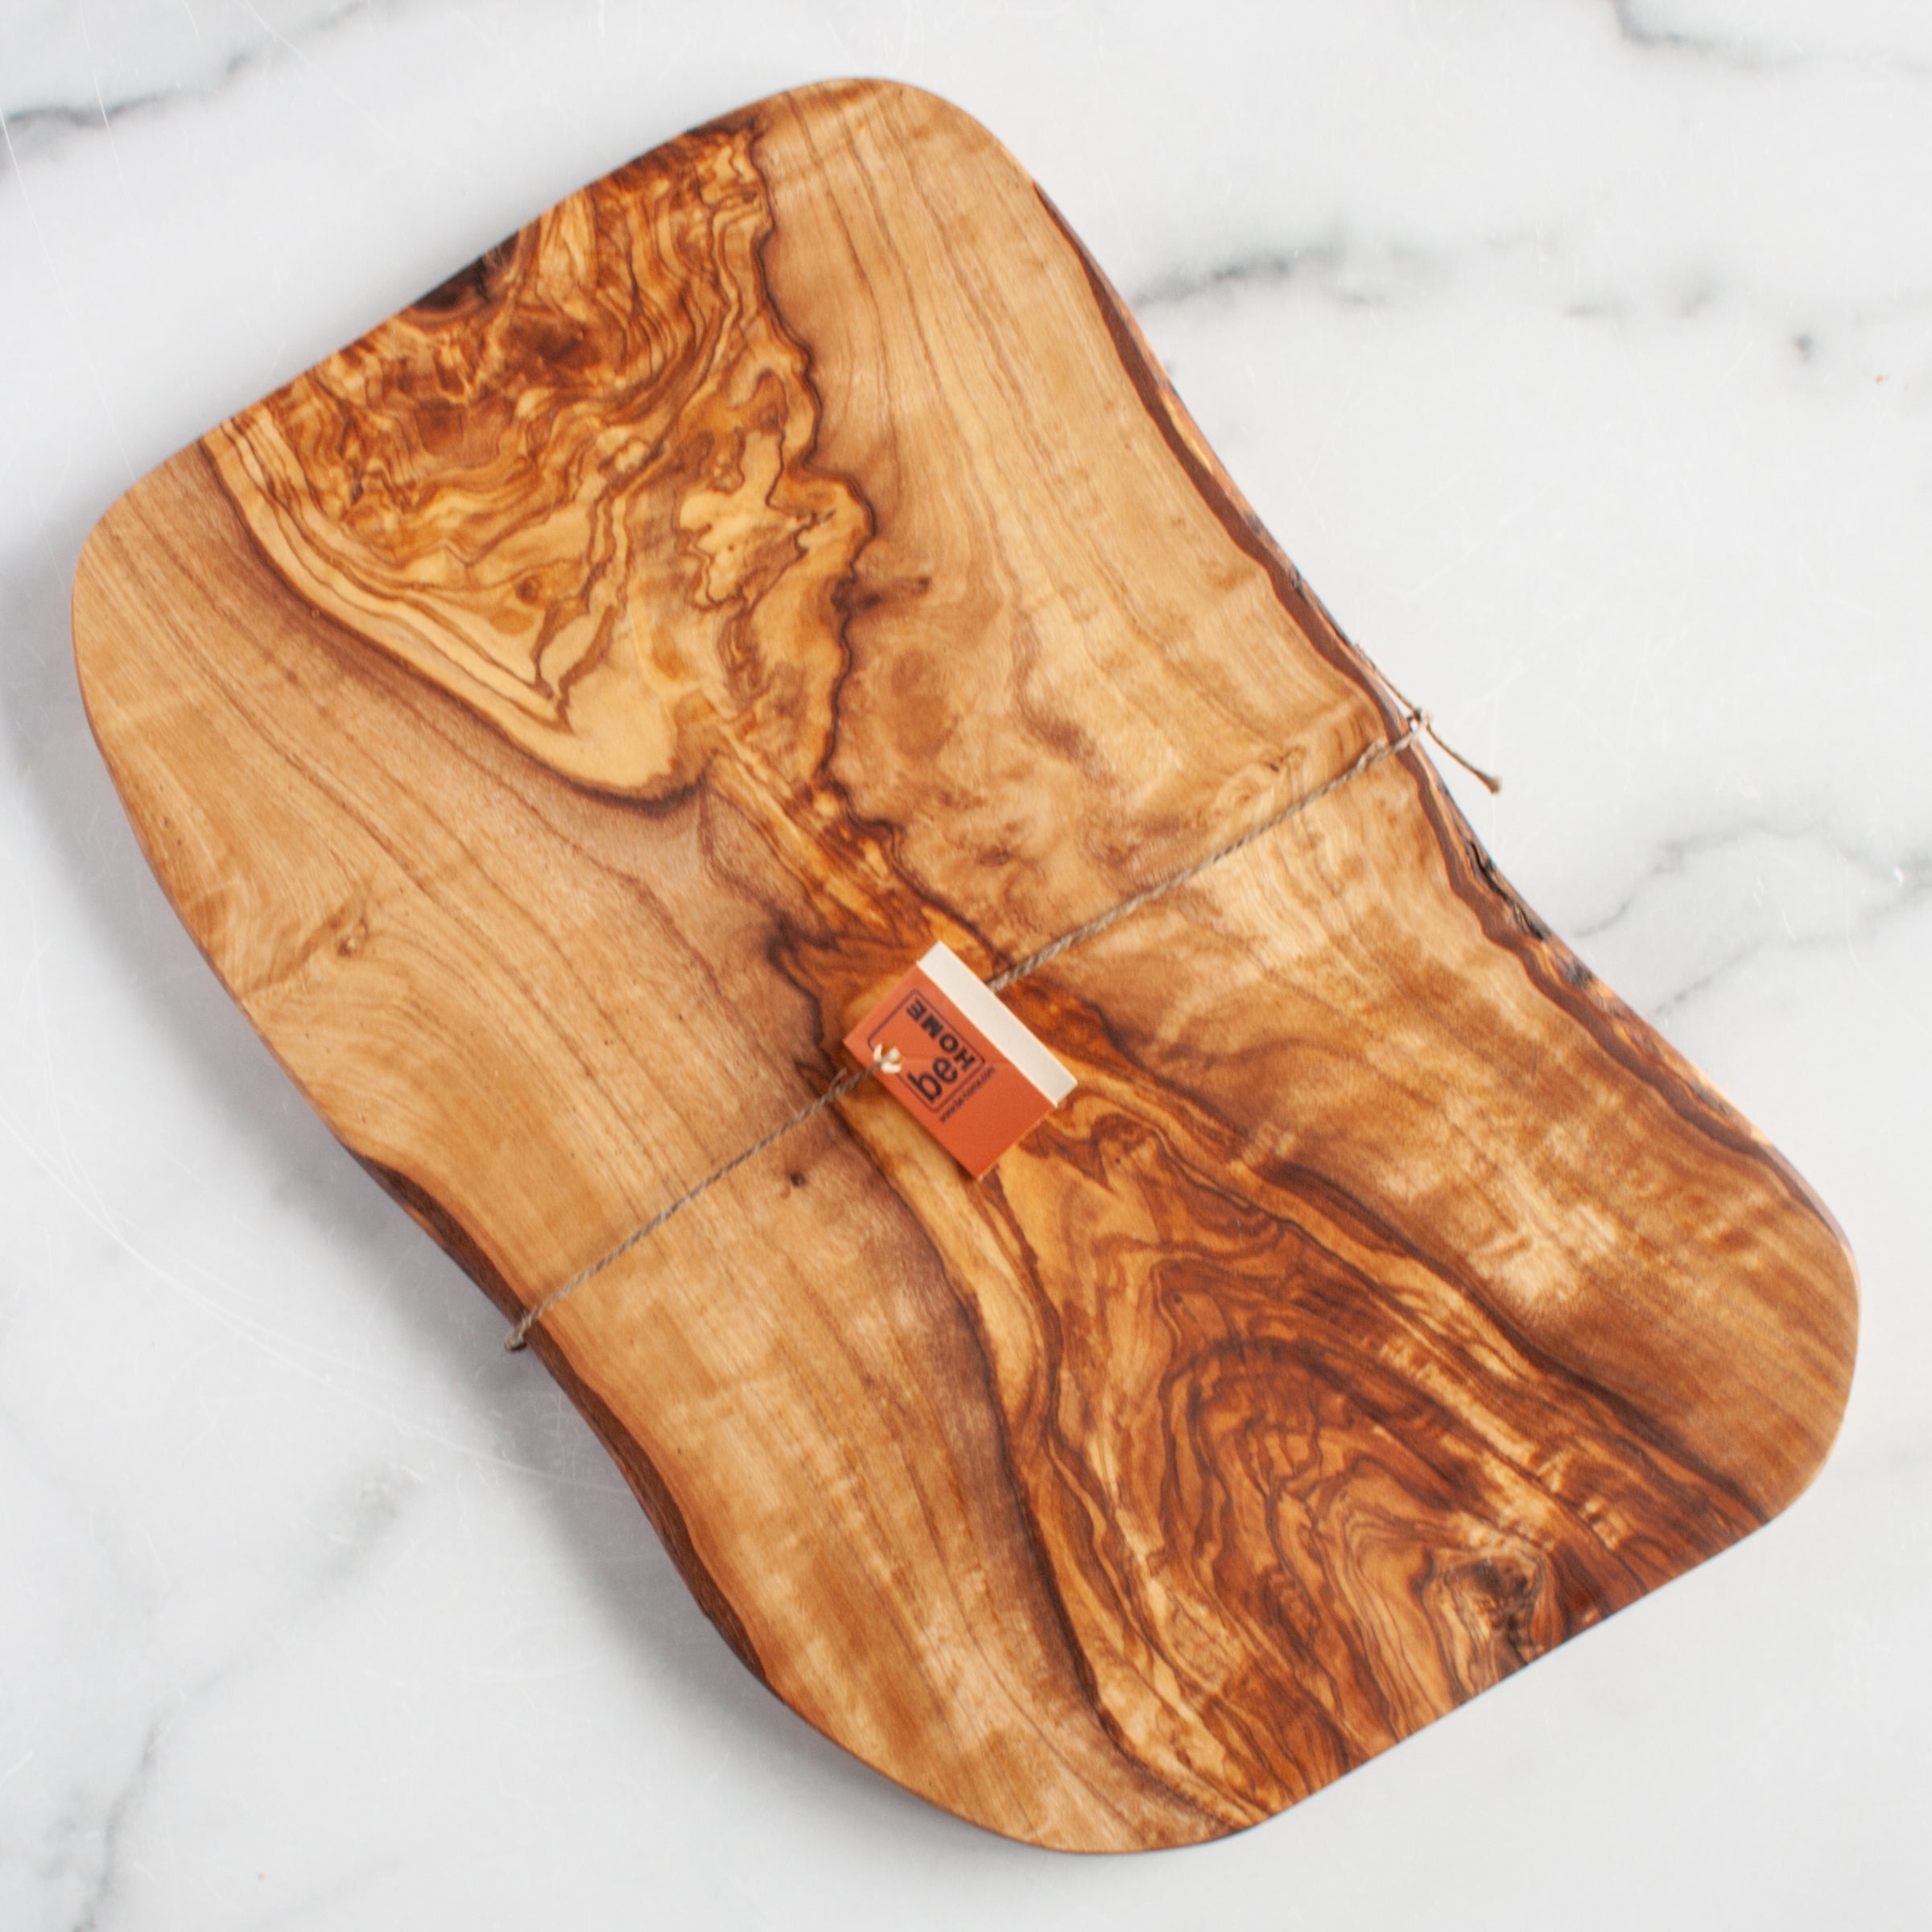 Round Natural Acacia Serving Board - Varnished, Bark Edges - 9 inch x 9 inch x 1 1/2 inch - 1 Count Box